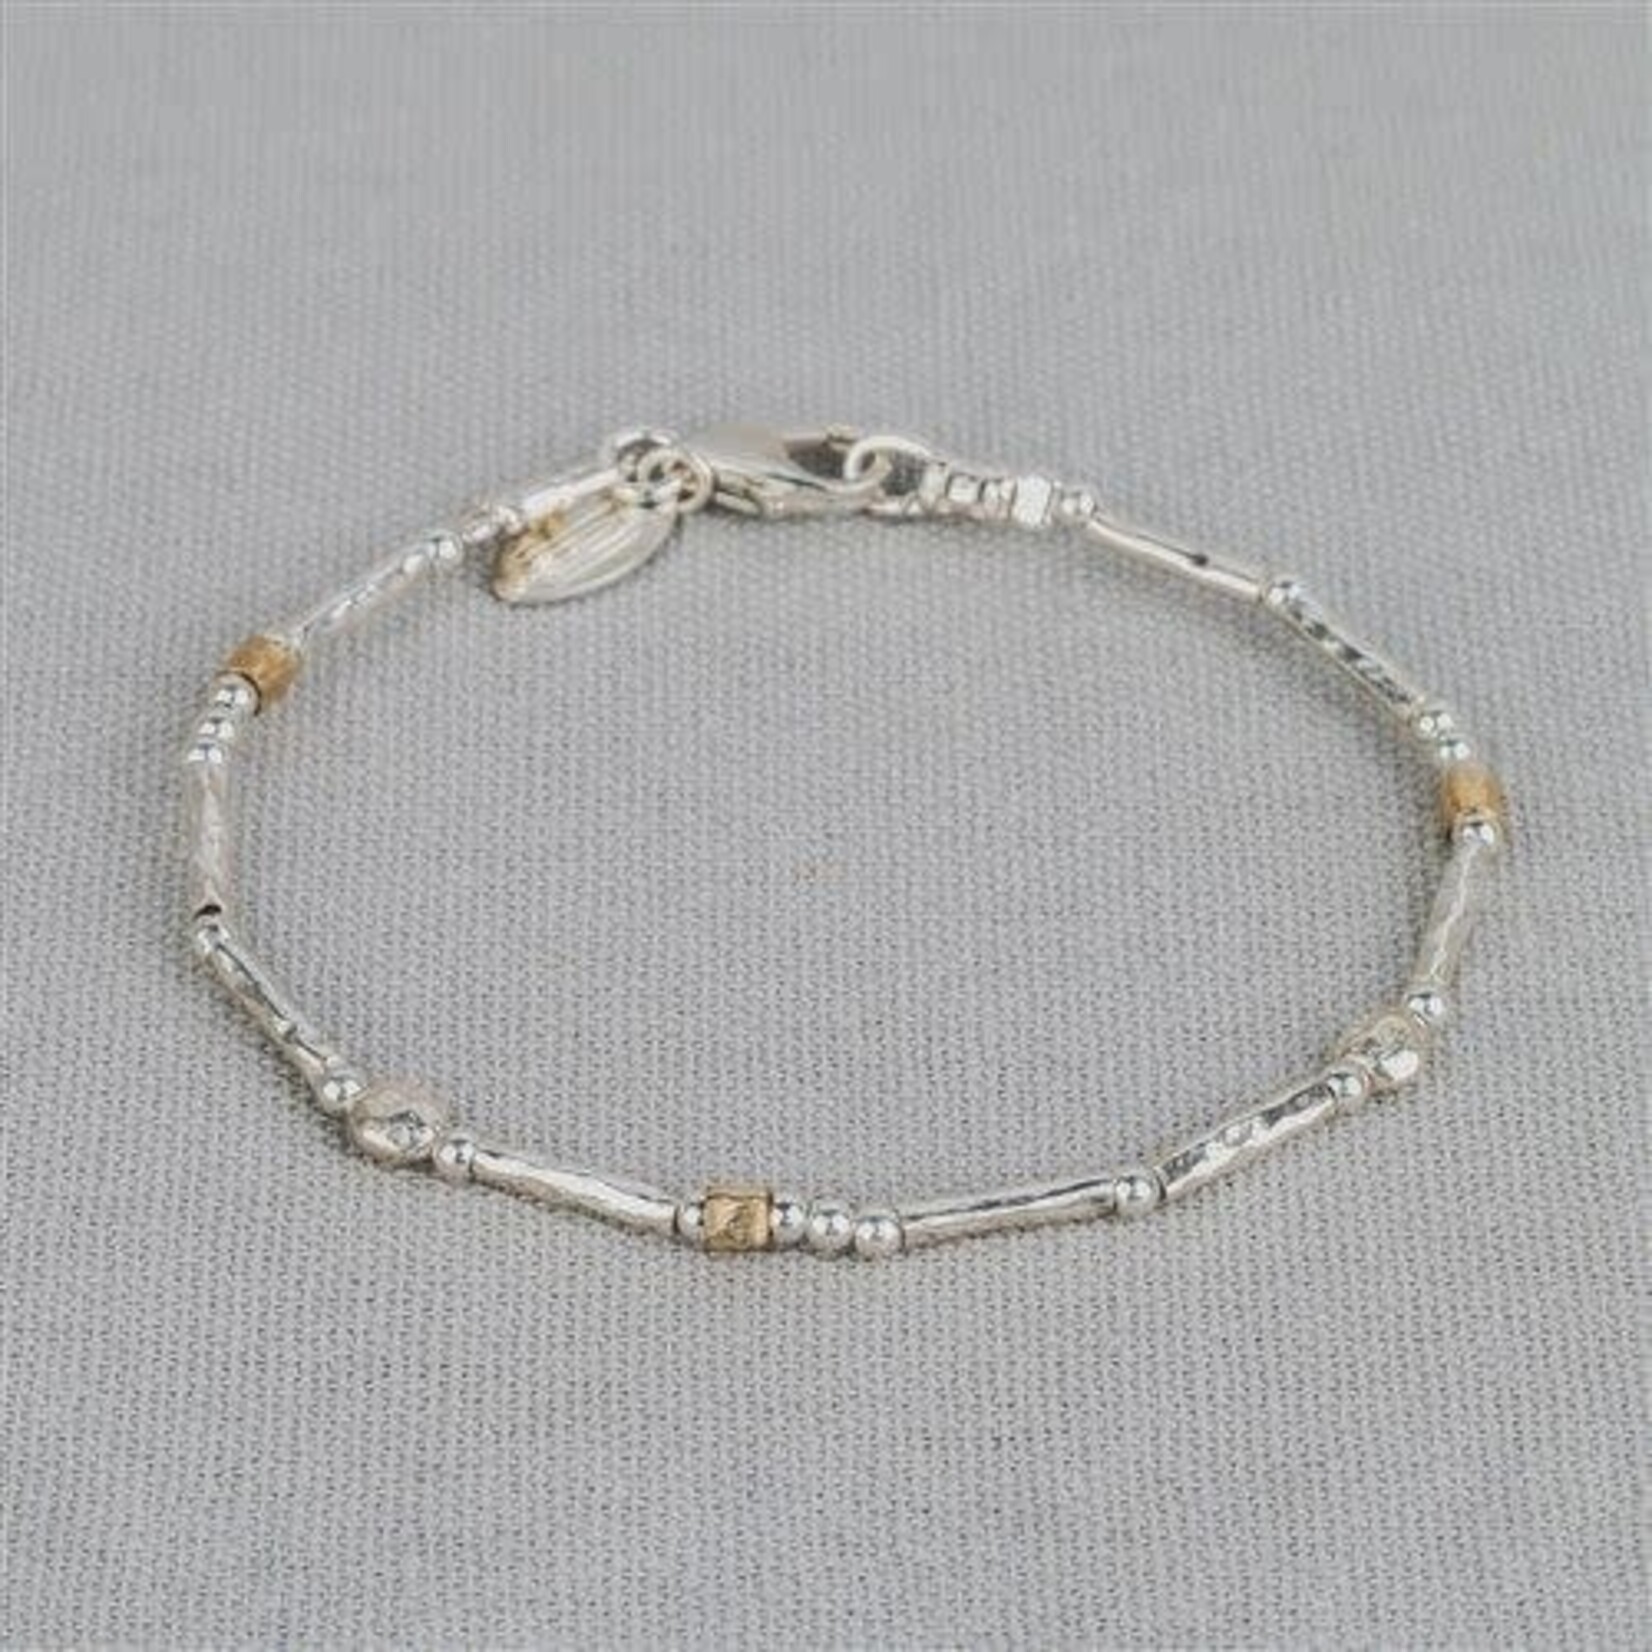 Jéh Jewels Jeh Jewels armband zilver met  “a little touch of goldfilled” 21260-18.5